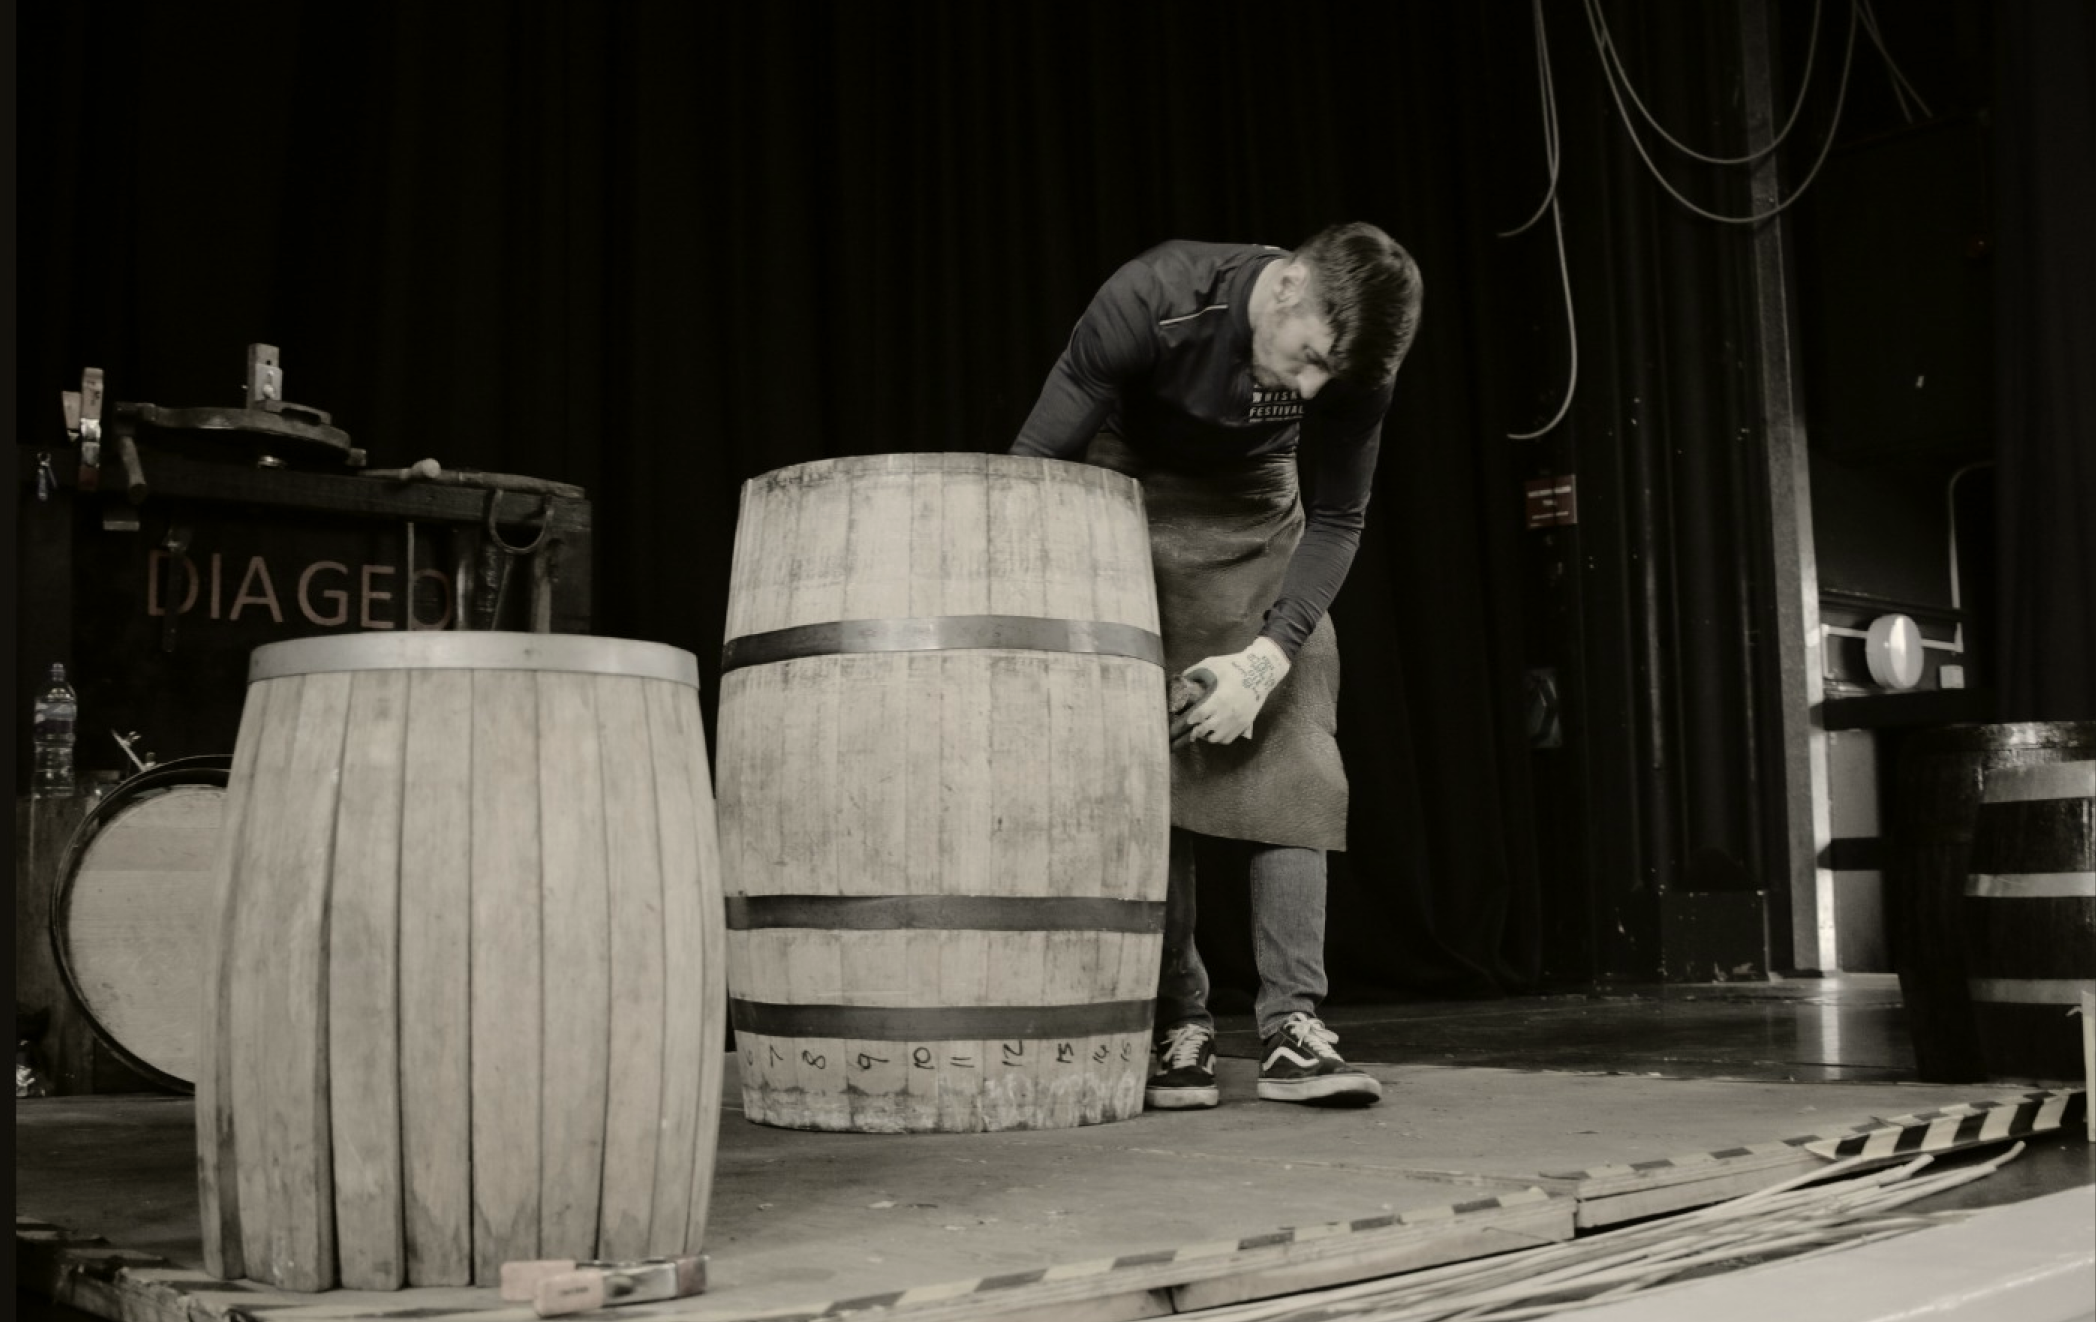 Background image of a man rolling out a barrel